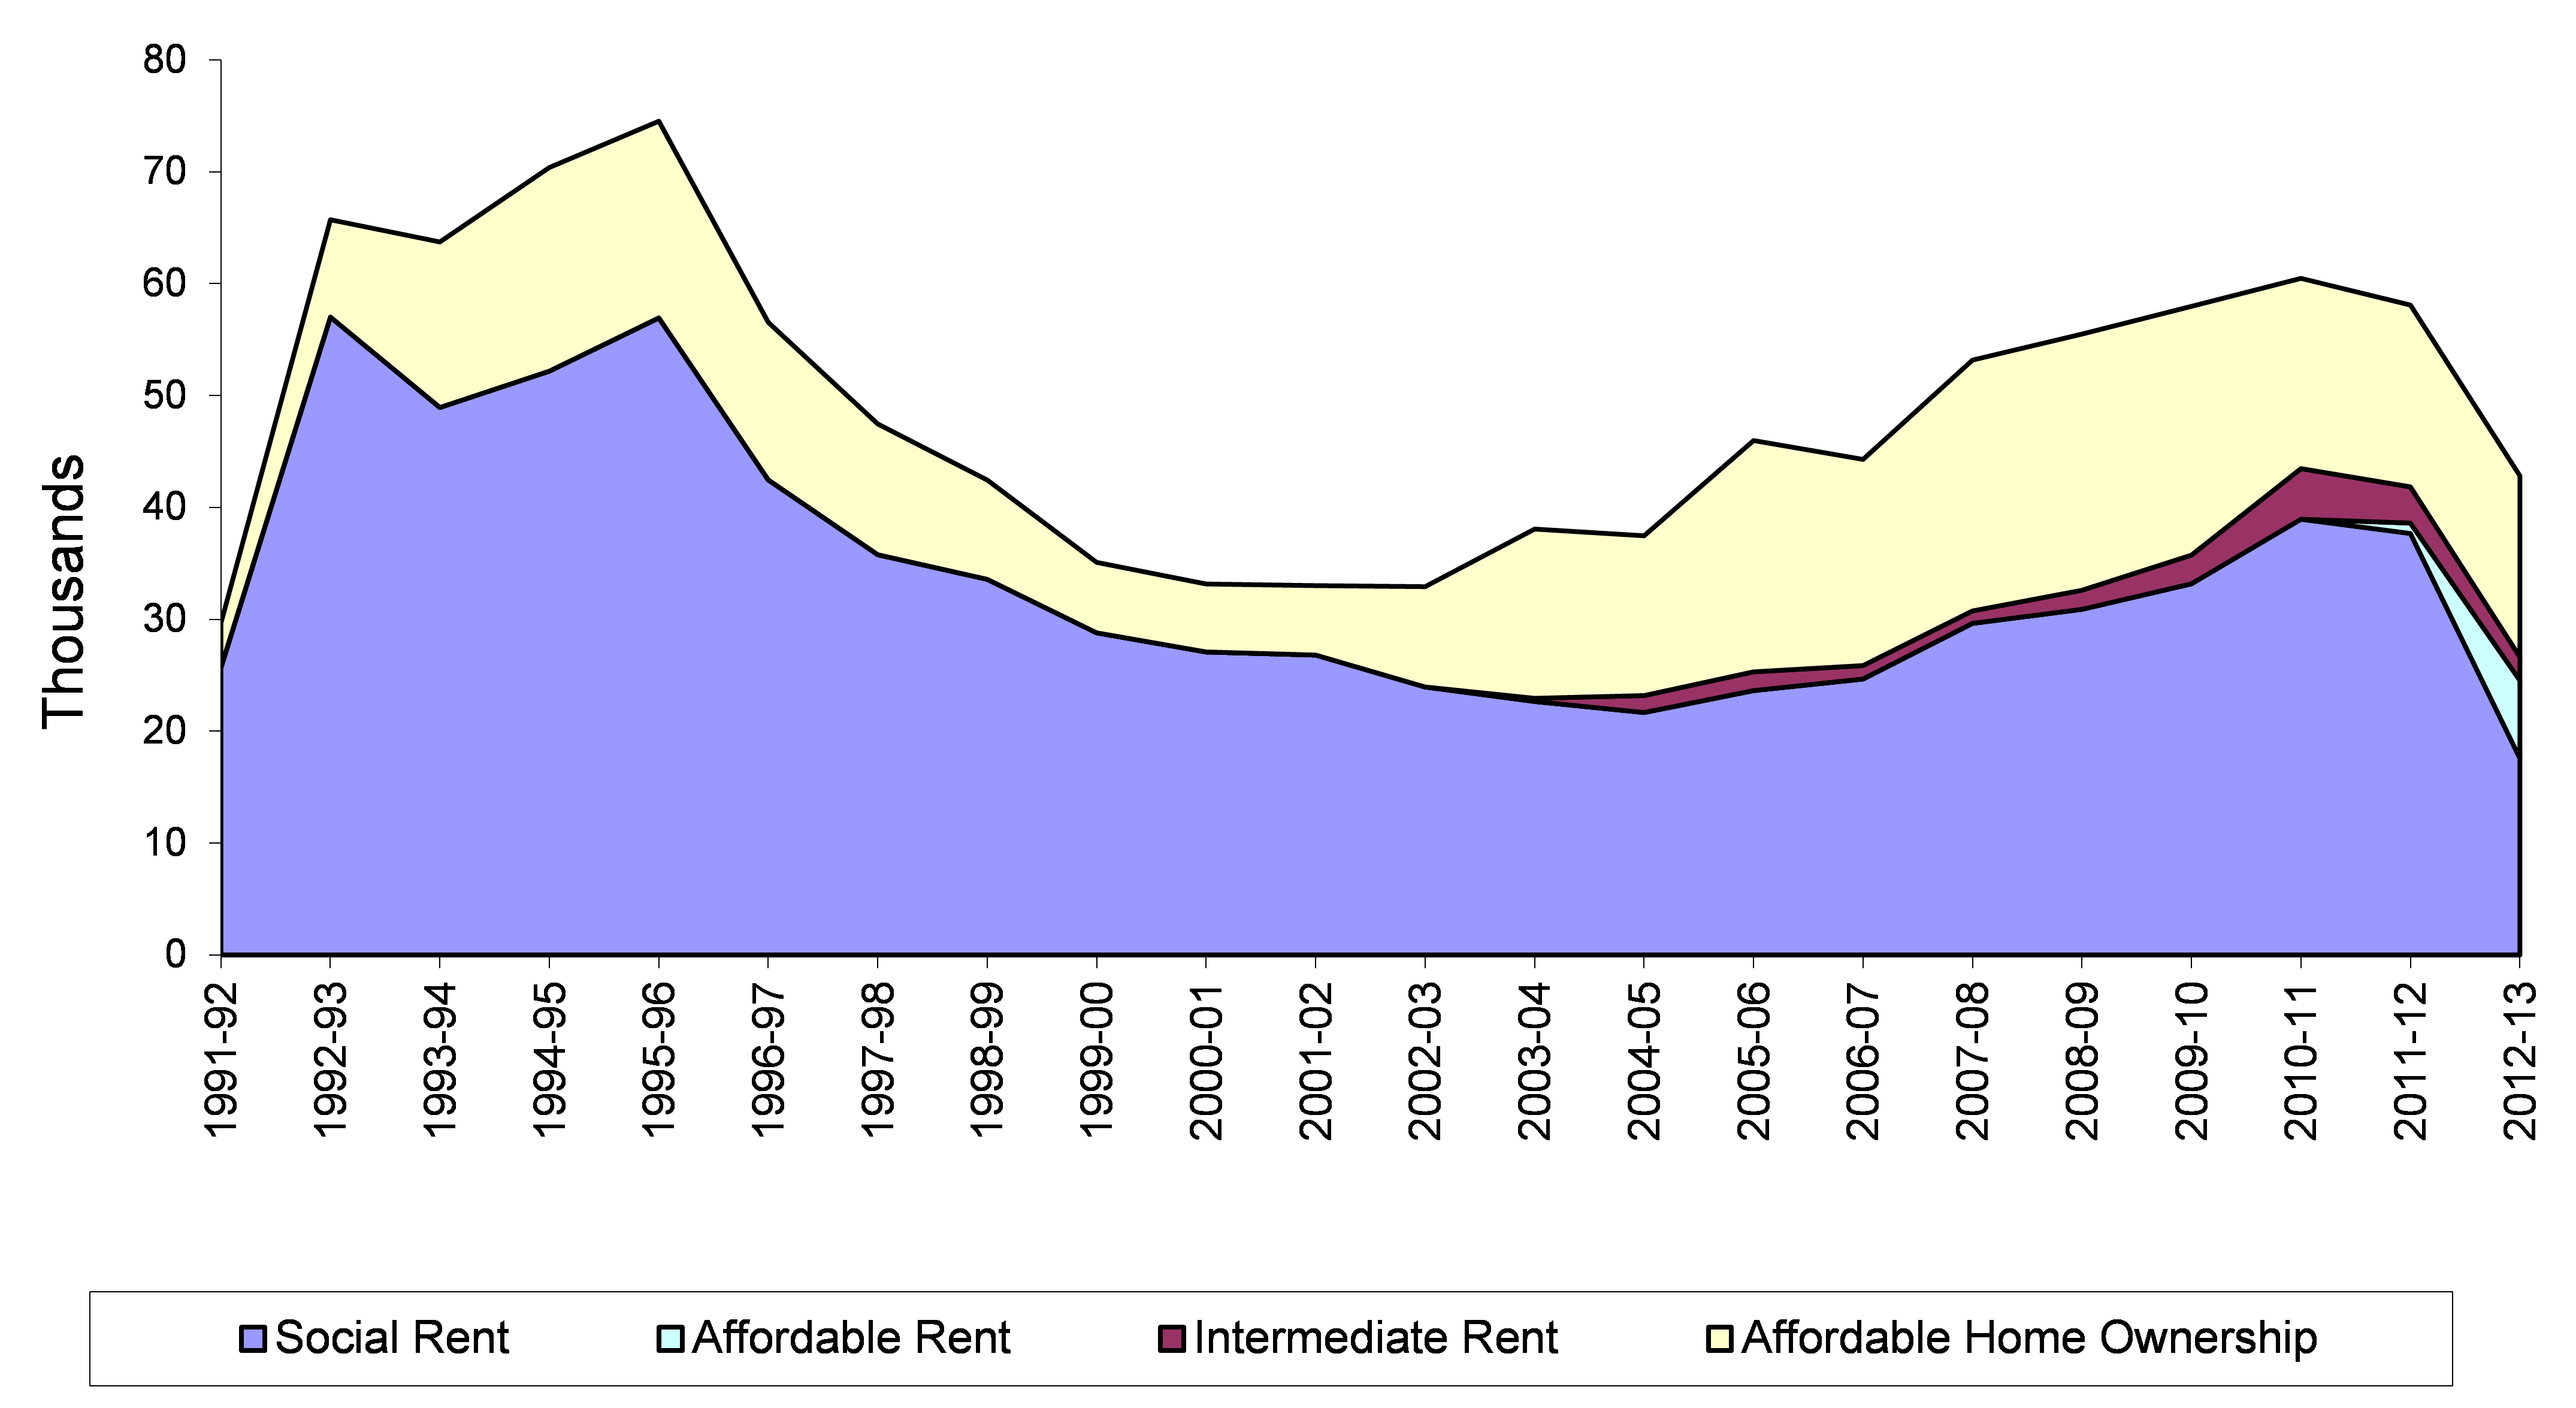 Affordable housing supply, England. Source: DCLG